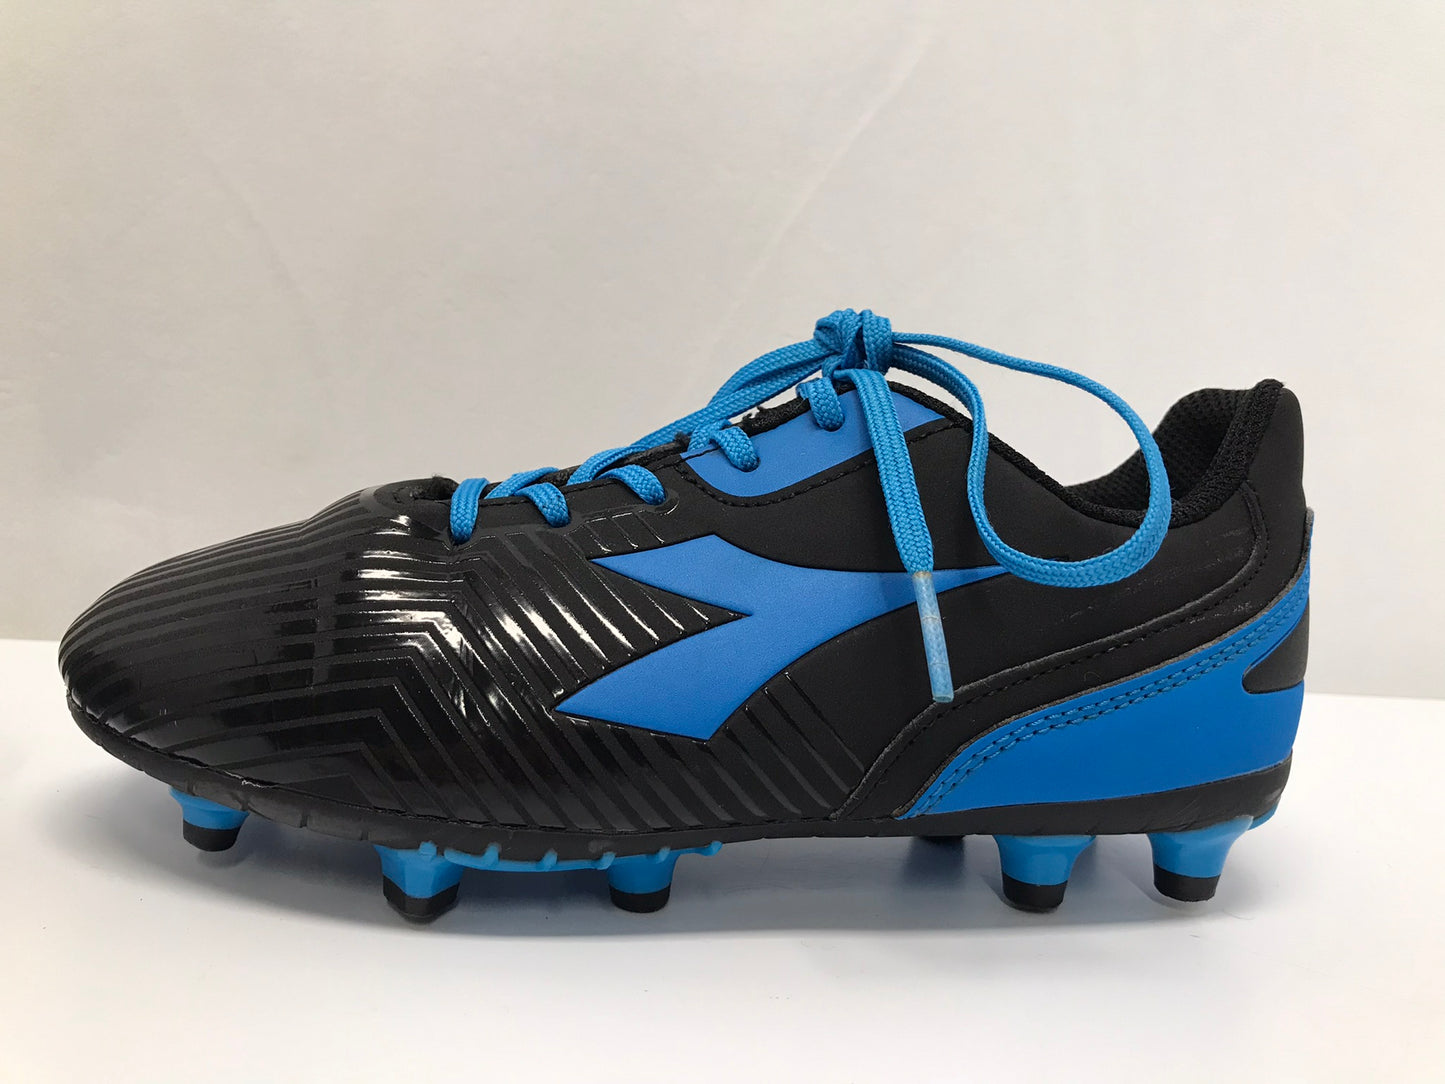 Soccer Shoes Cleats Child Size 1 Adidas Blue Black New Demo Model